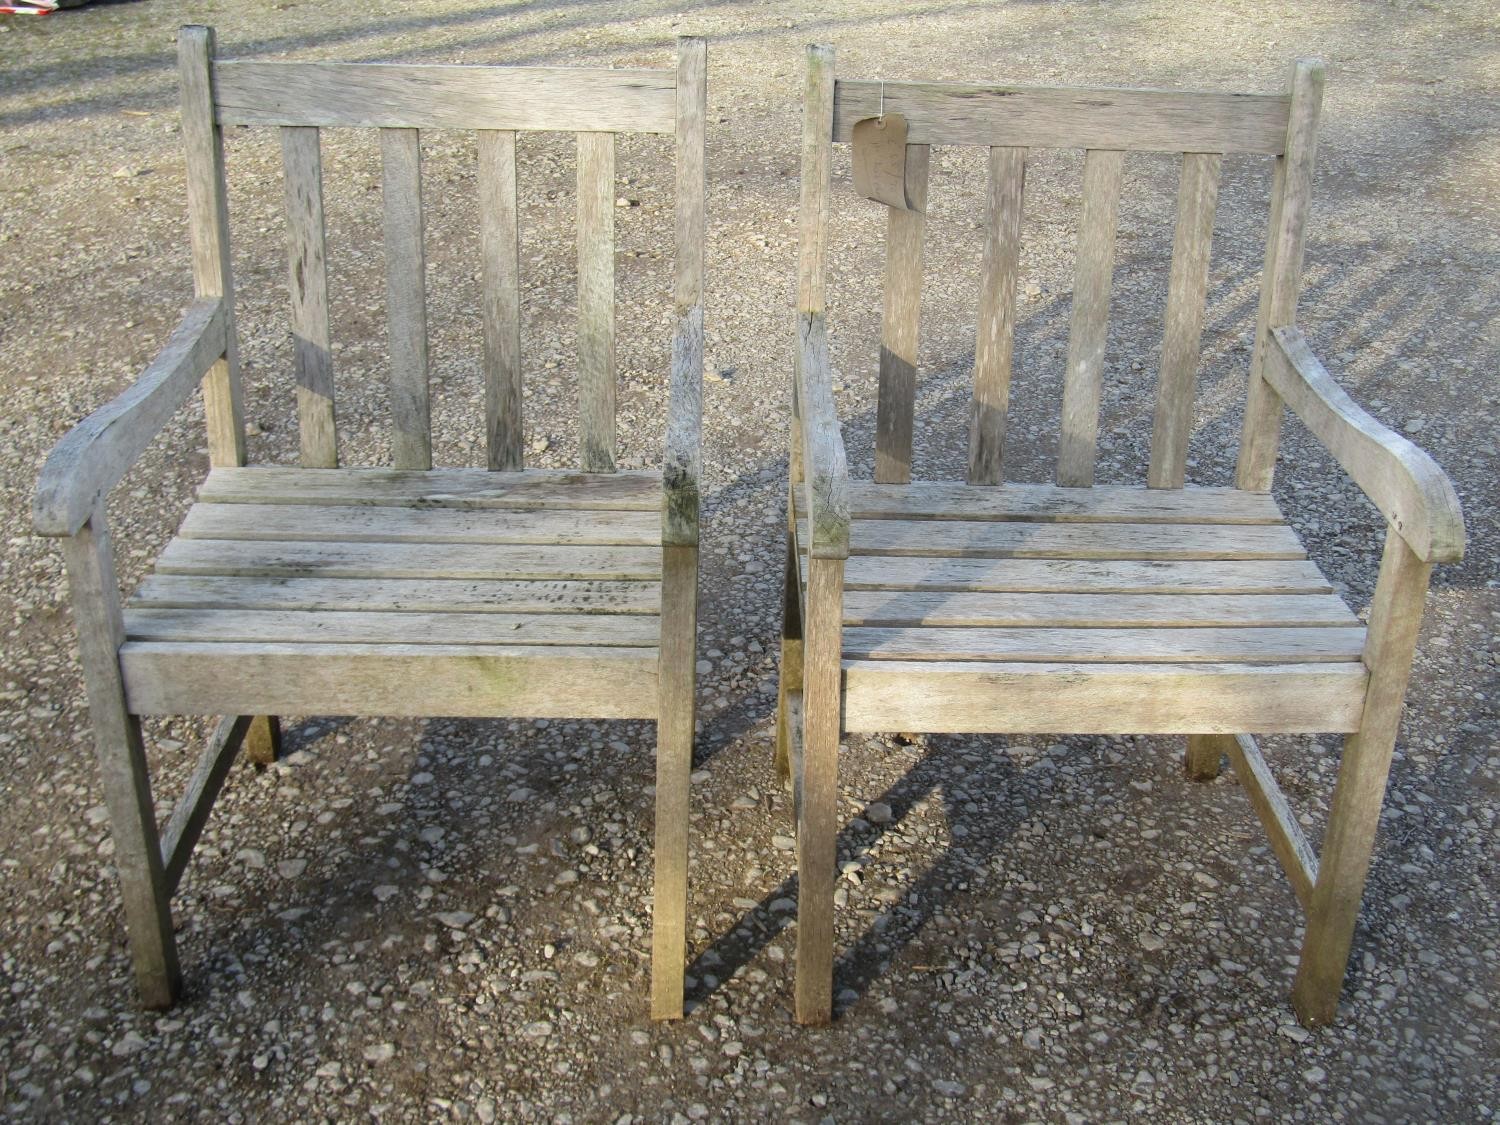 A pair of Firman weathered (silvered) teak garden open armchairs with slatted seats and backs (